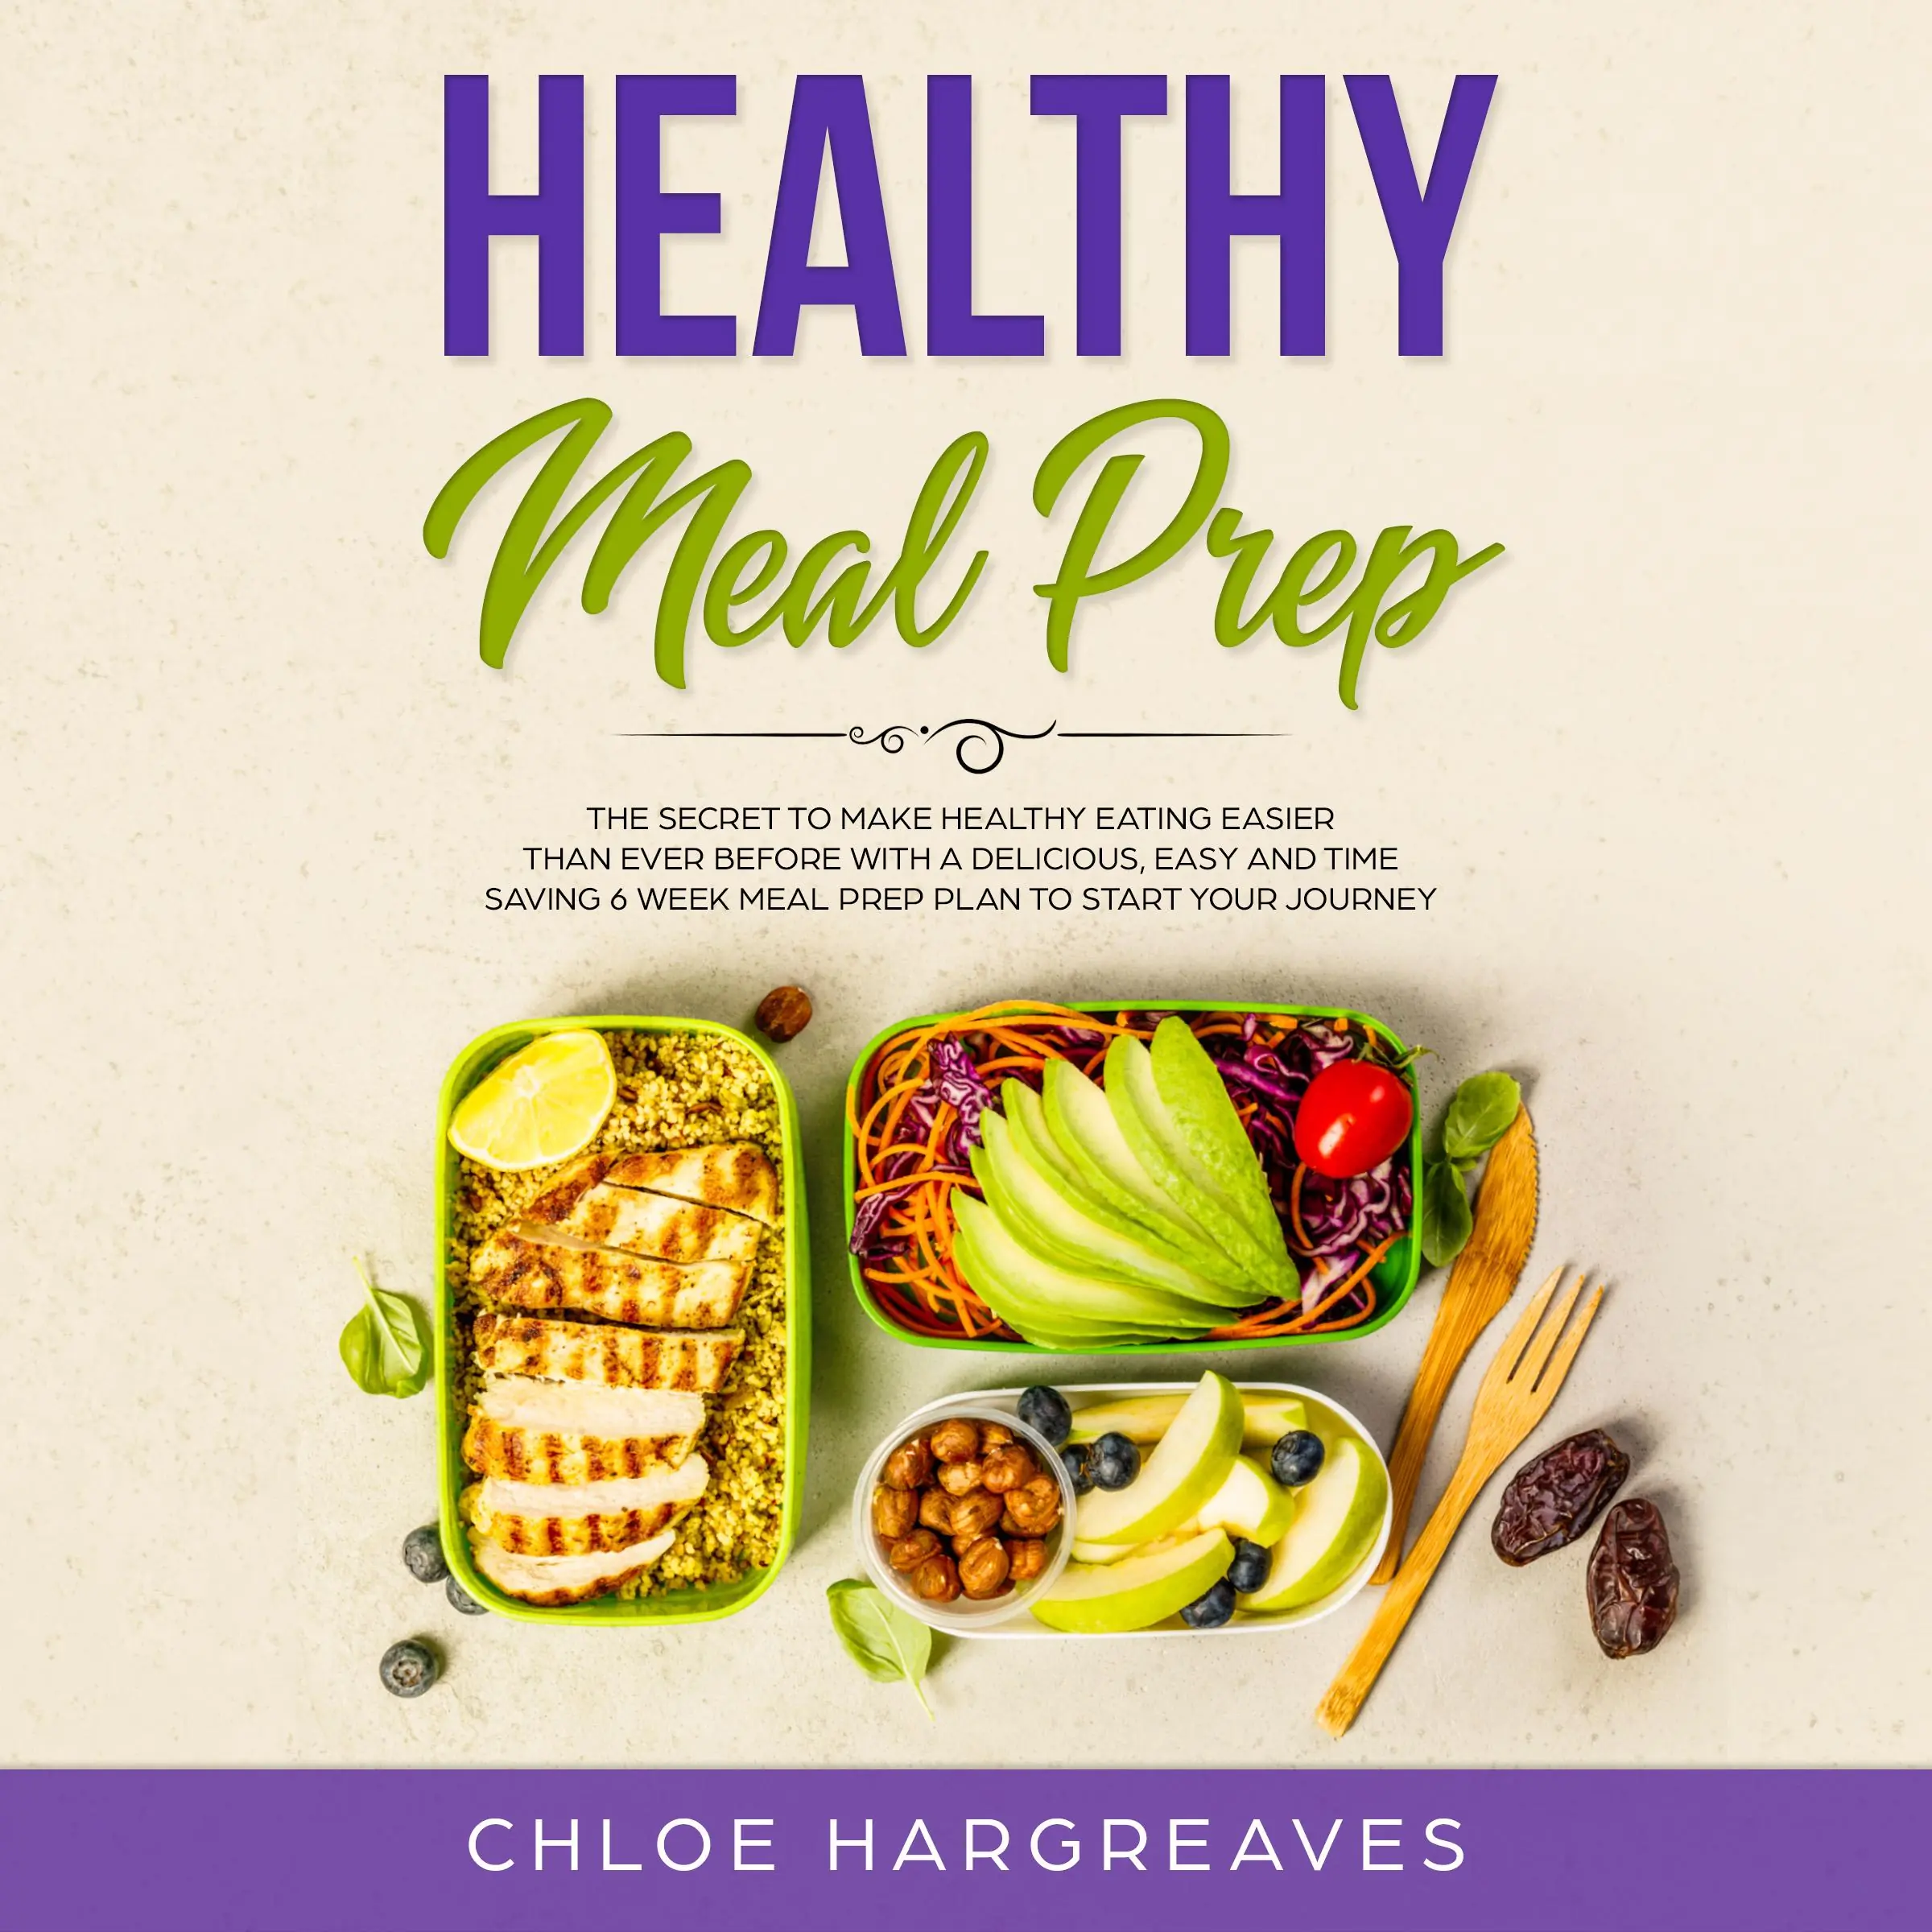 Healthy Meal Prep: The Secret to Make Healthy Eating Easier than Ever Before with a Delicious, Easy and Time Saving 6 Week Meal Prep Plan to Start Your Journey Audiobook by Chloe Hargreaves